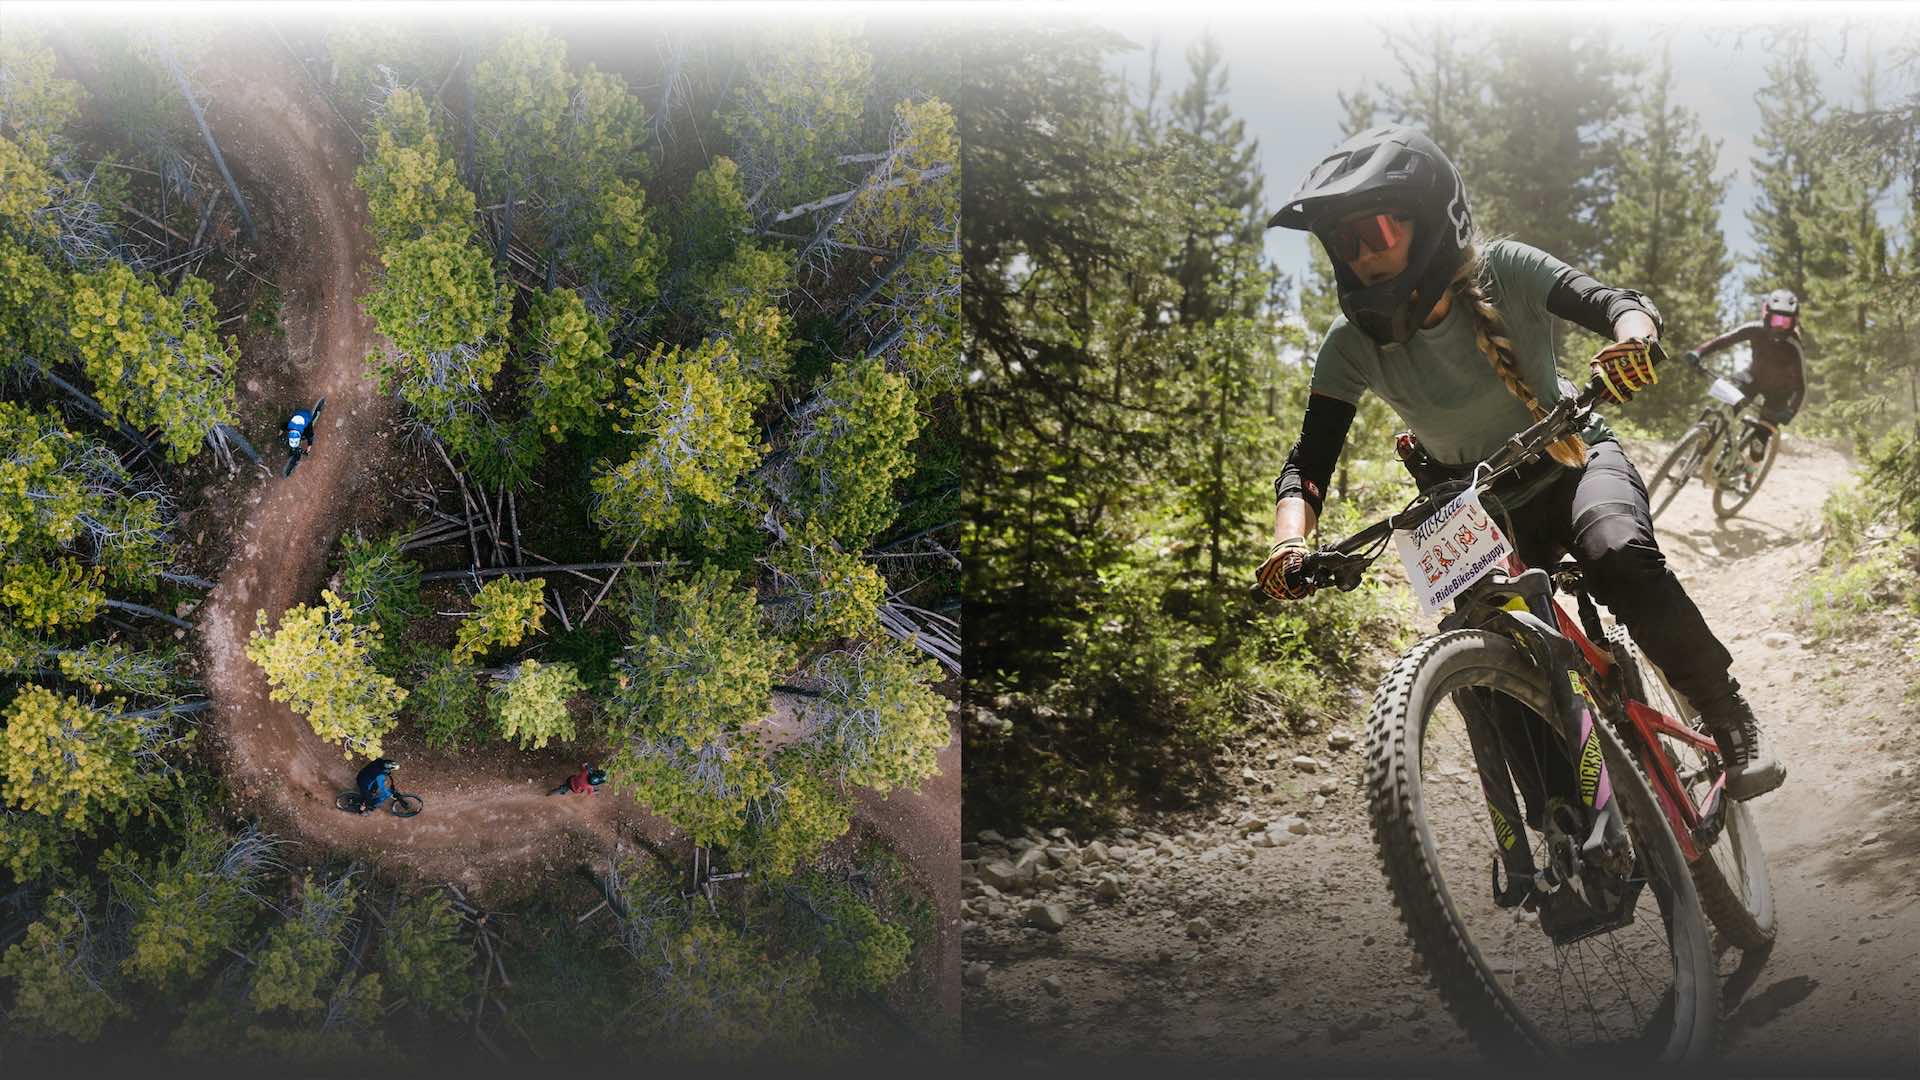 Side-by-side images of mountain bikers